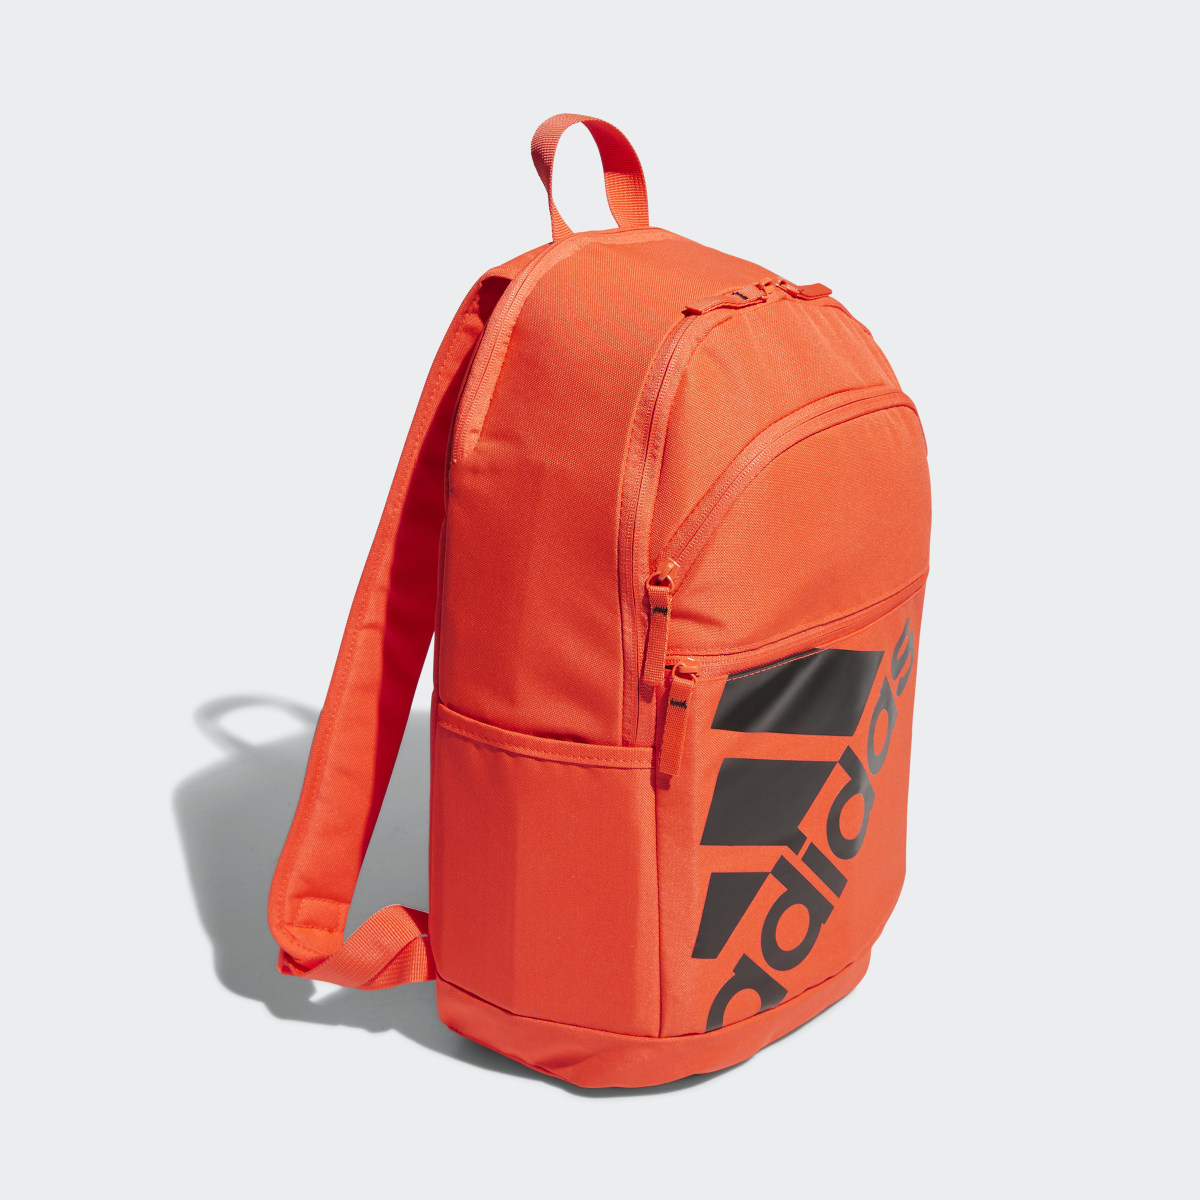 Adidas CL Classic Backpack. 4